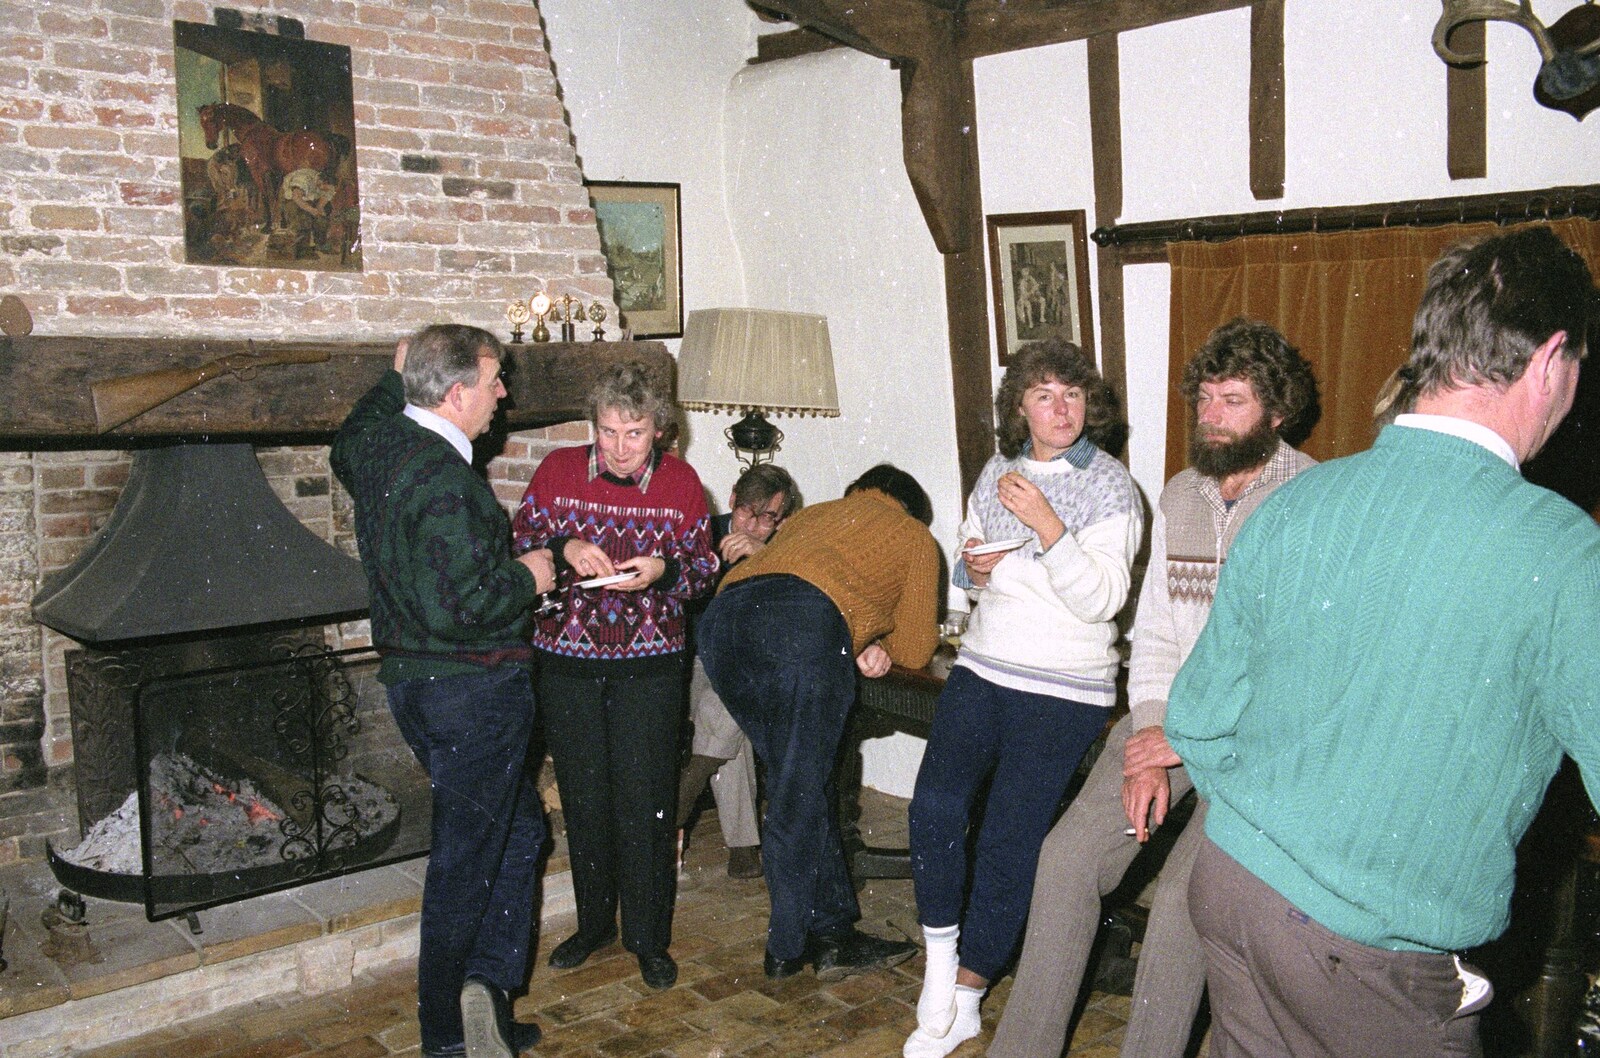 Mingling in the dining room from A Stuston Bonfire Night, Suffolk - 5th November 1989